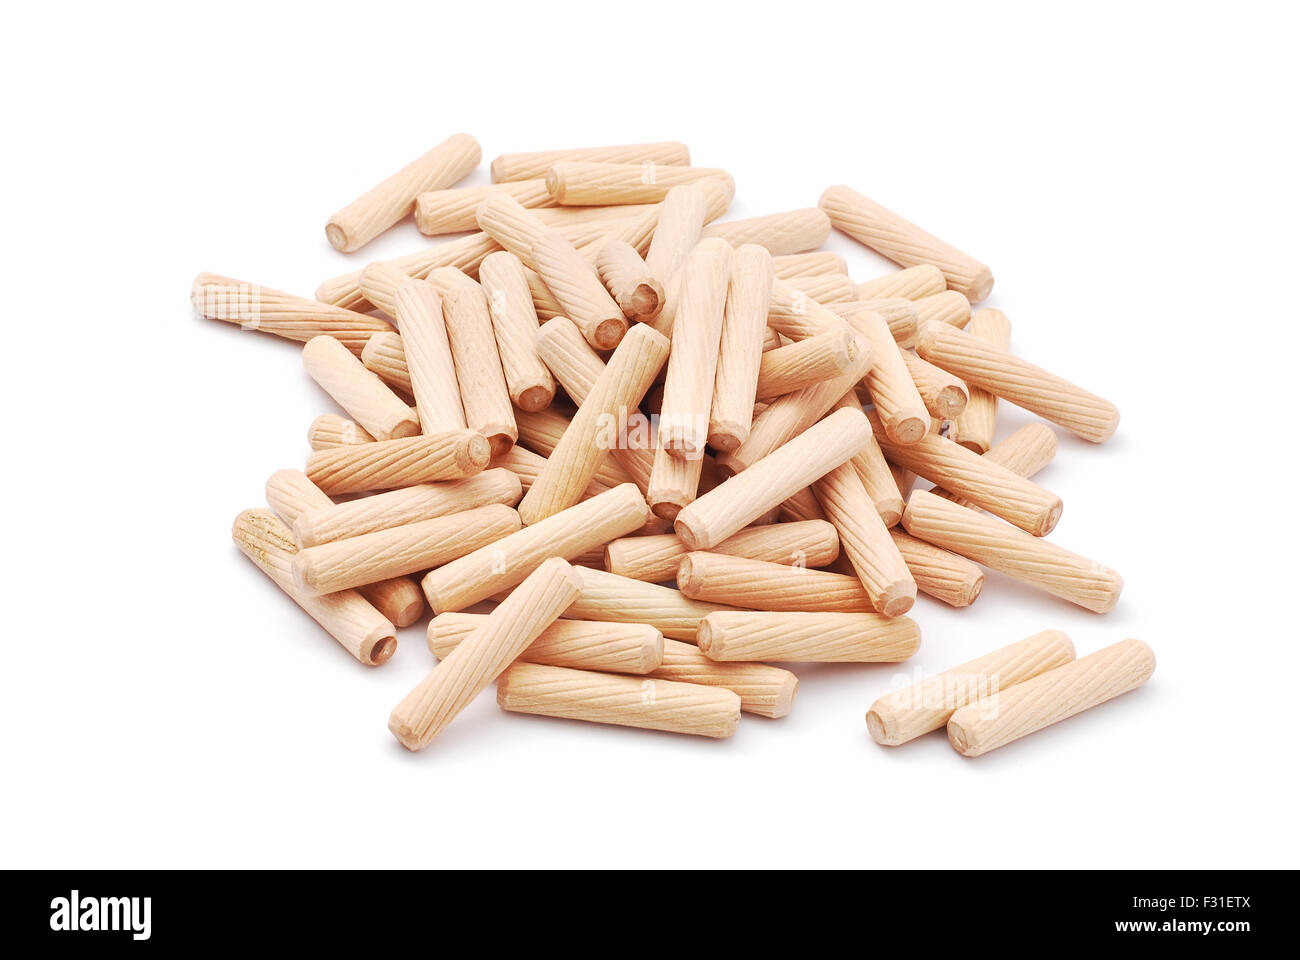 wooden dowels on white background Stock Photo